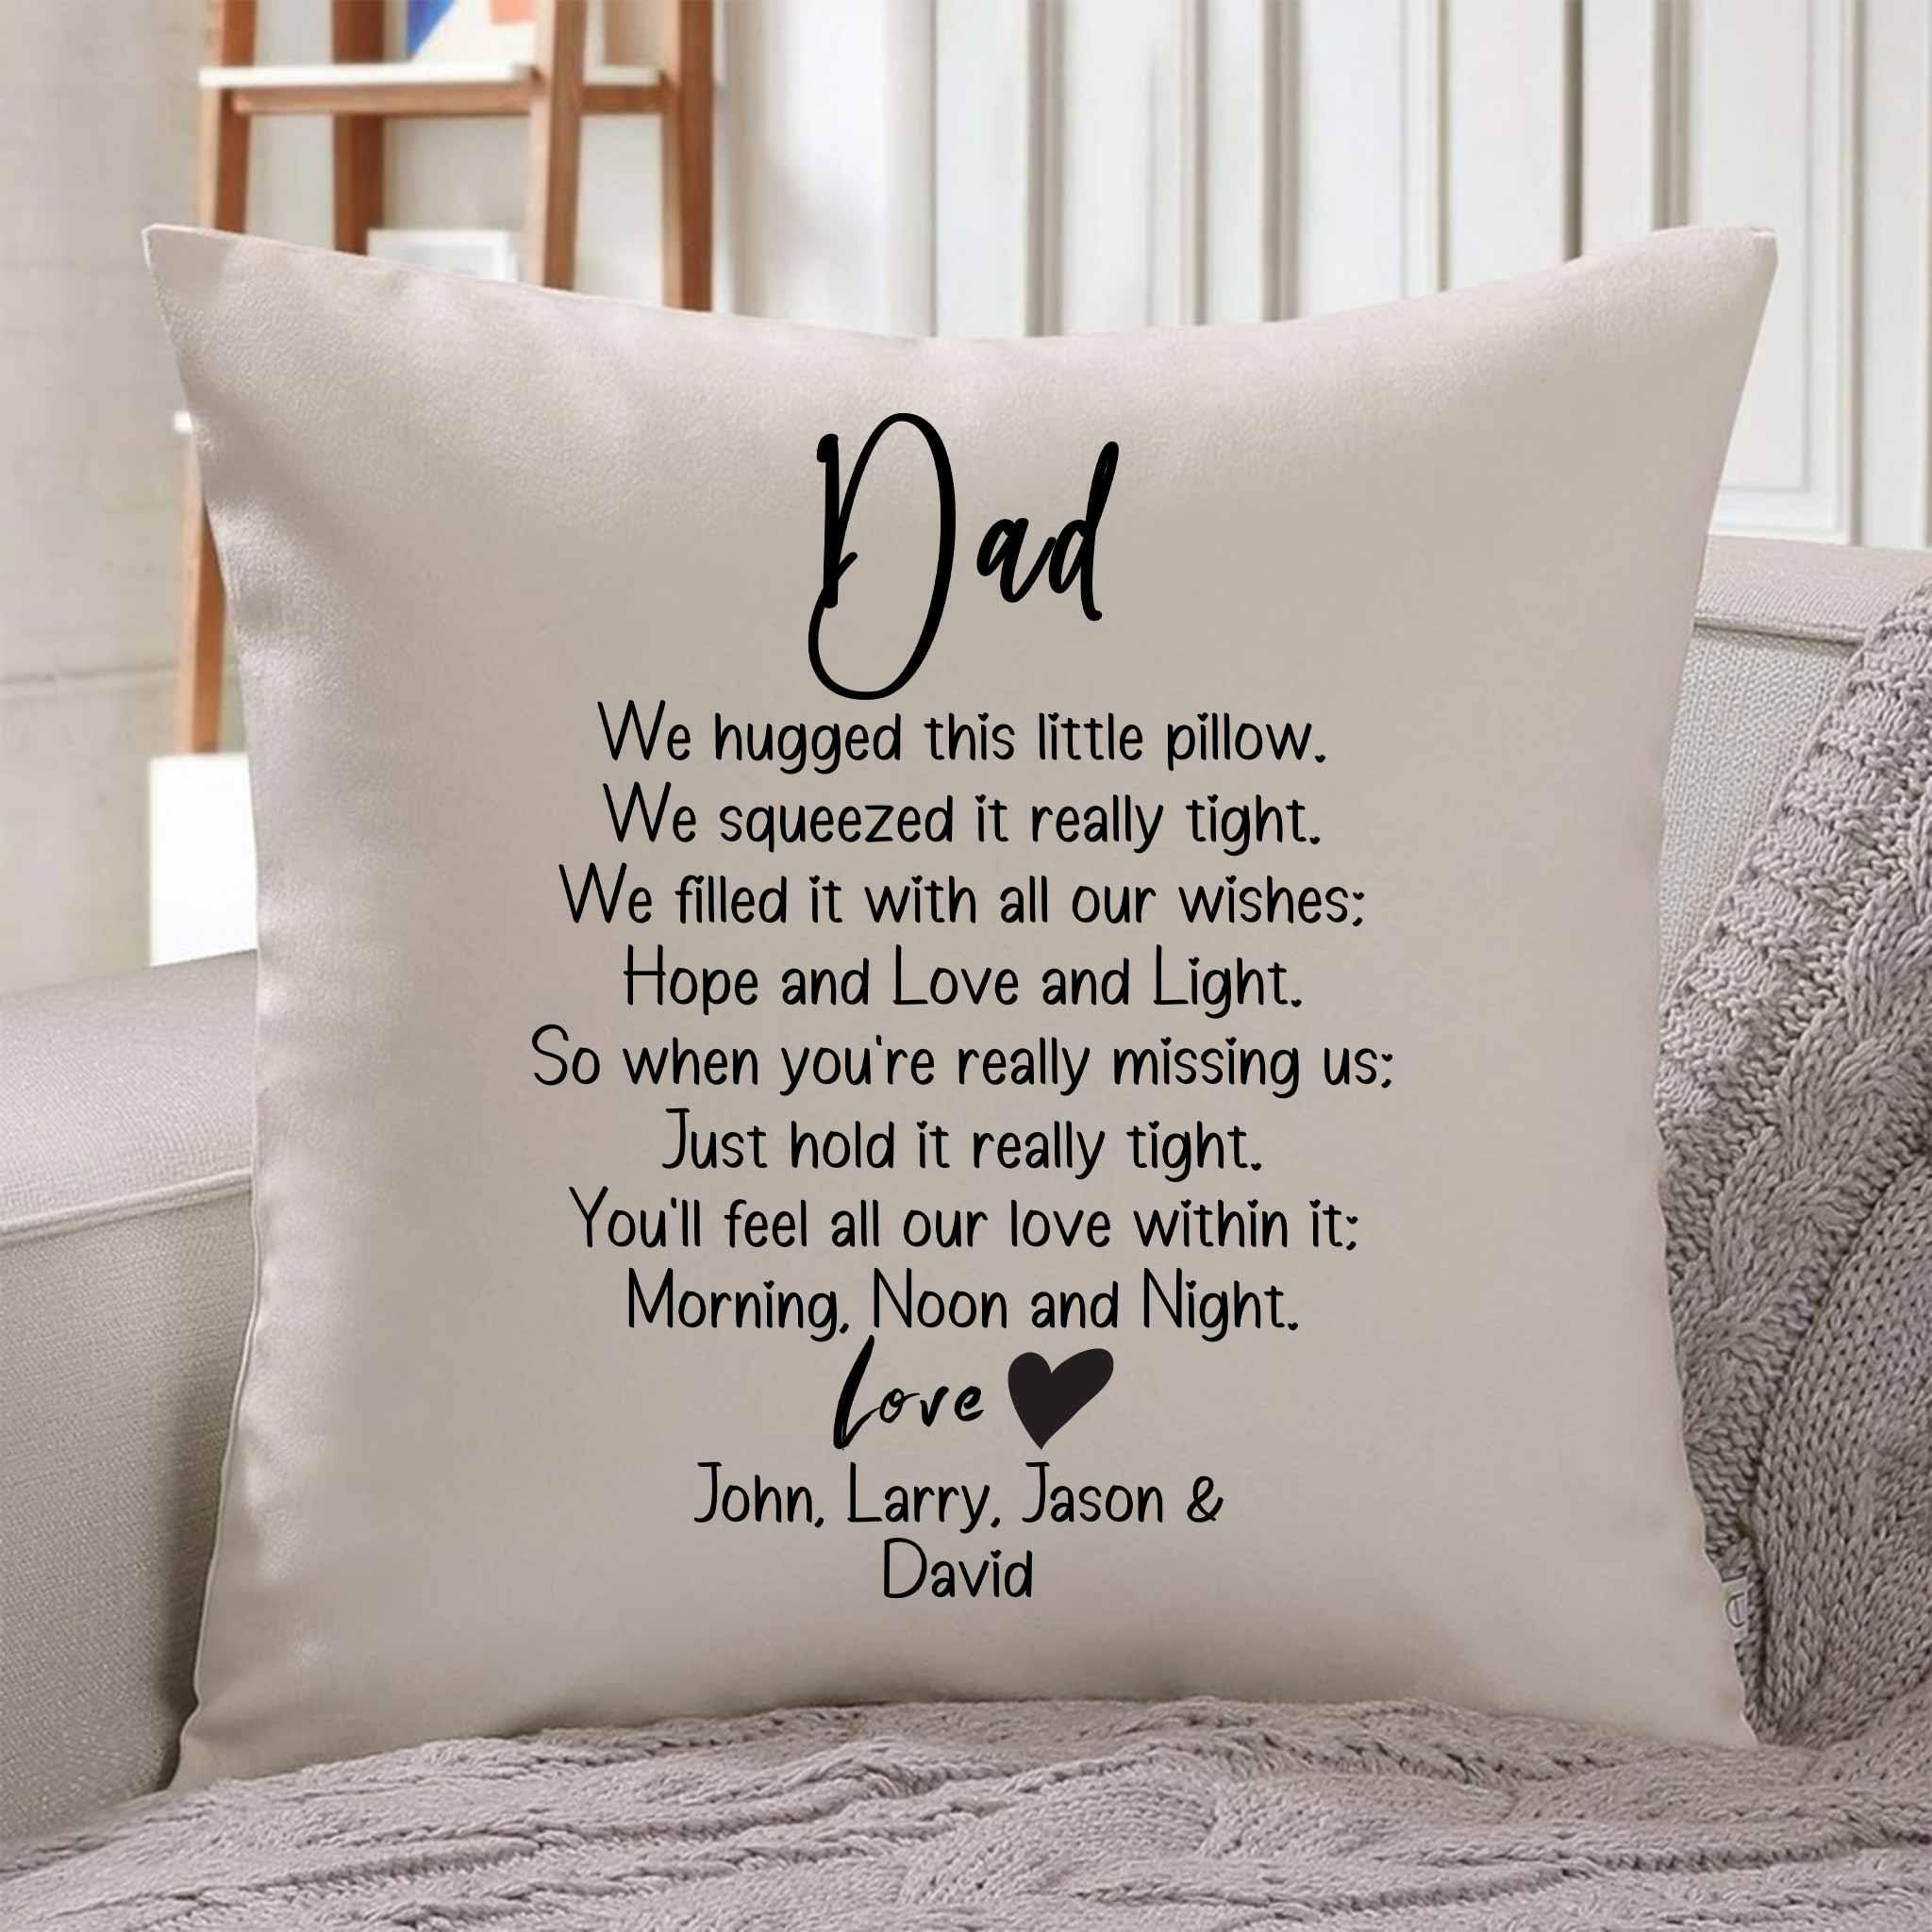 Dad We Hugged This Little Pillow Poem v2 Personalized Throw PillowCustomly Gifts